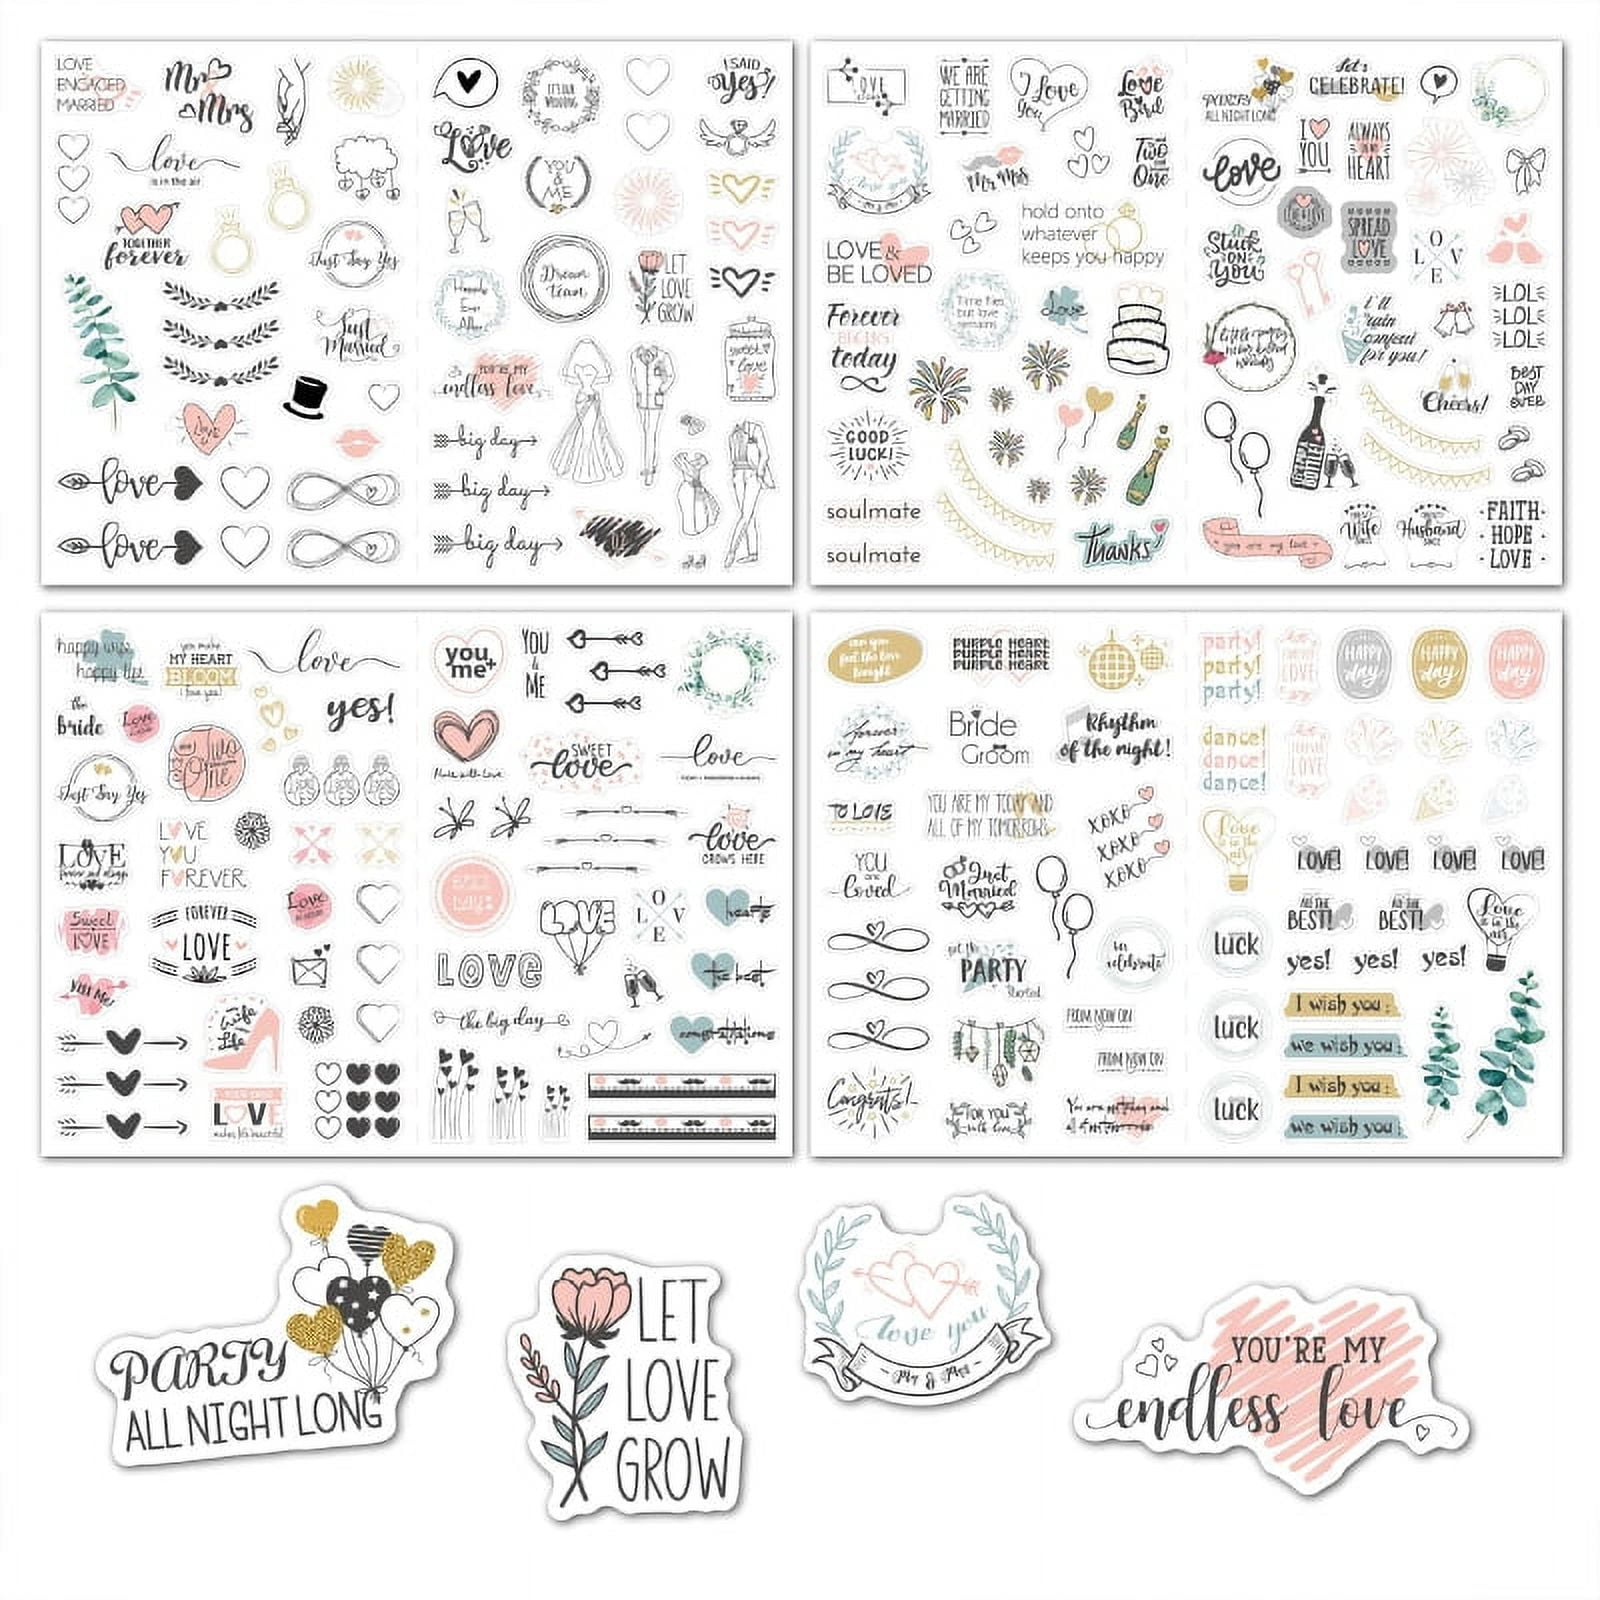 Add Some Fun to Your Diary with Rice Bowl Decorative Stickers